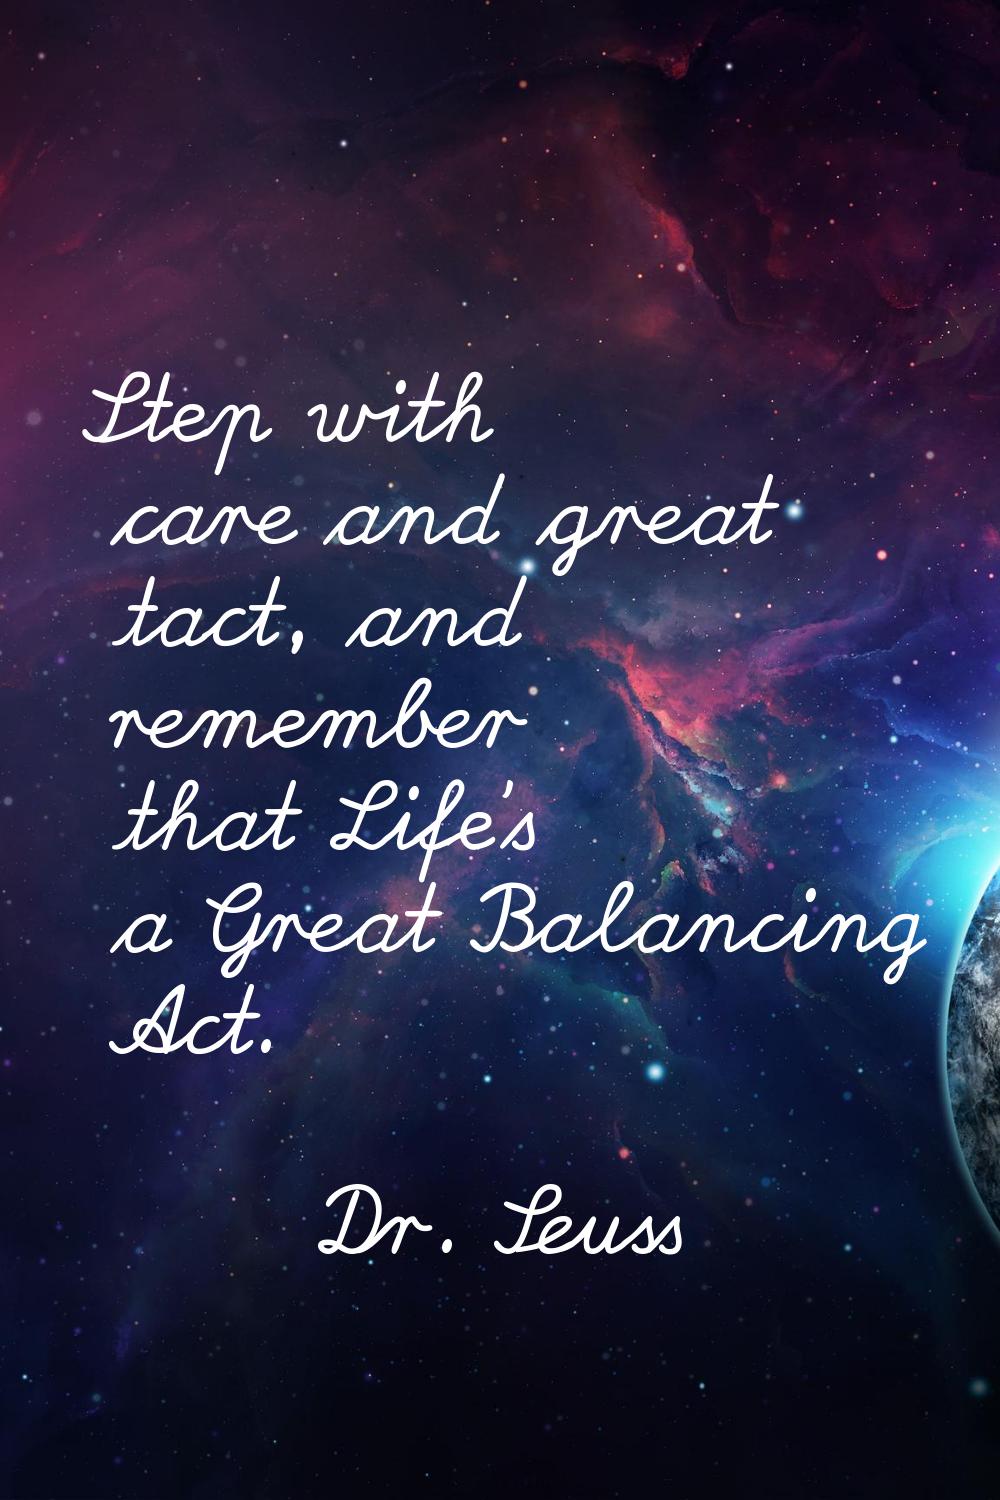 Step with care and great tact, and remember that Life's a Great Balancing Act.